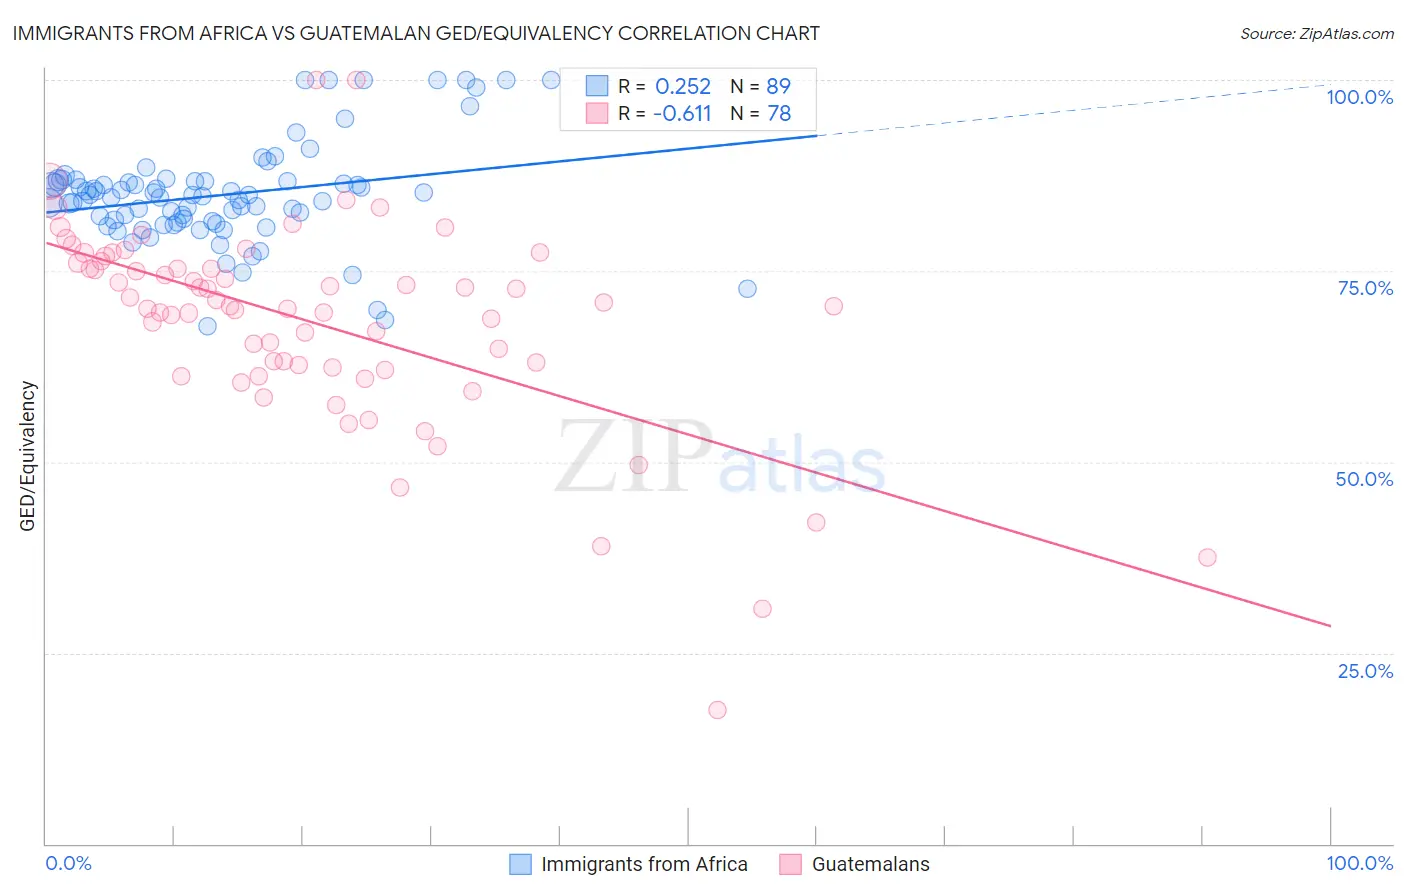 Immigrants from Africa vs Guatemalan GED/Equivalency